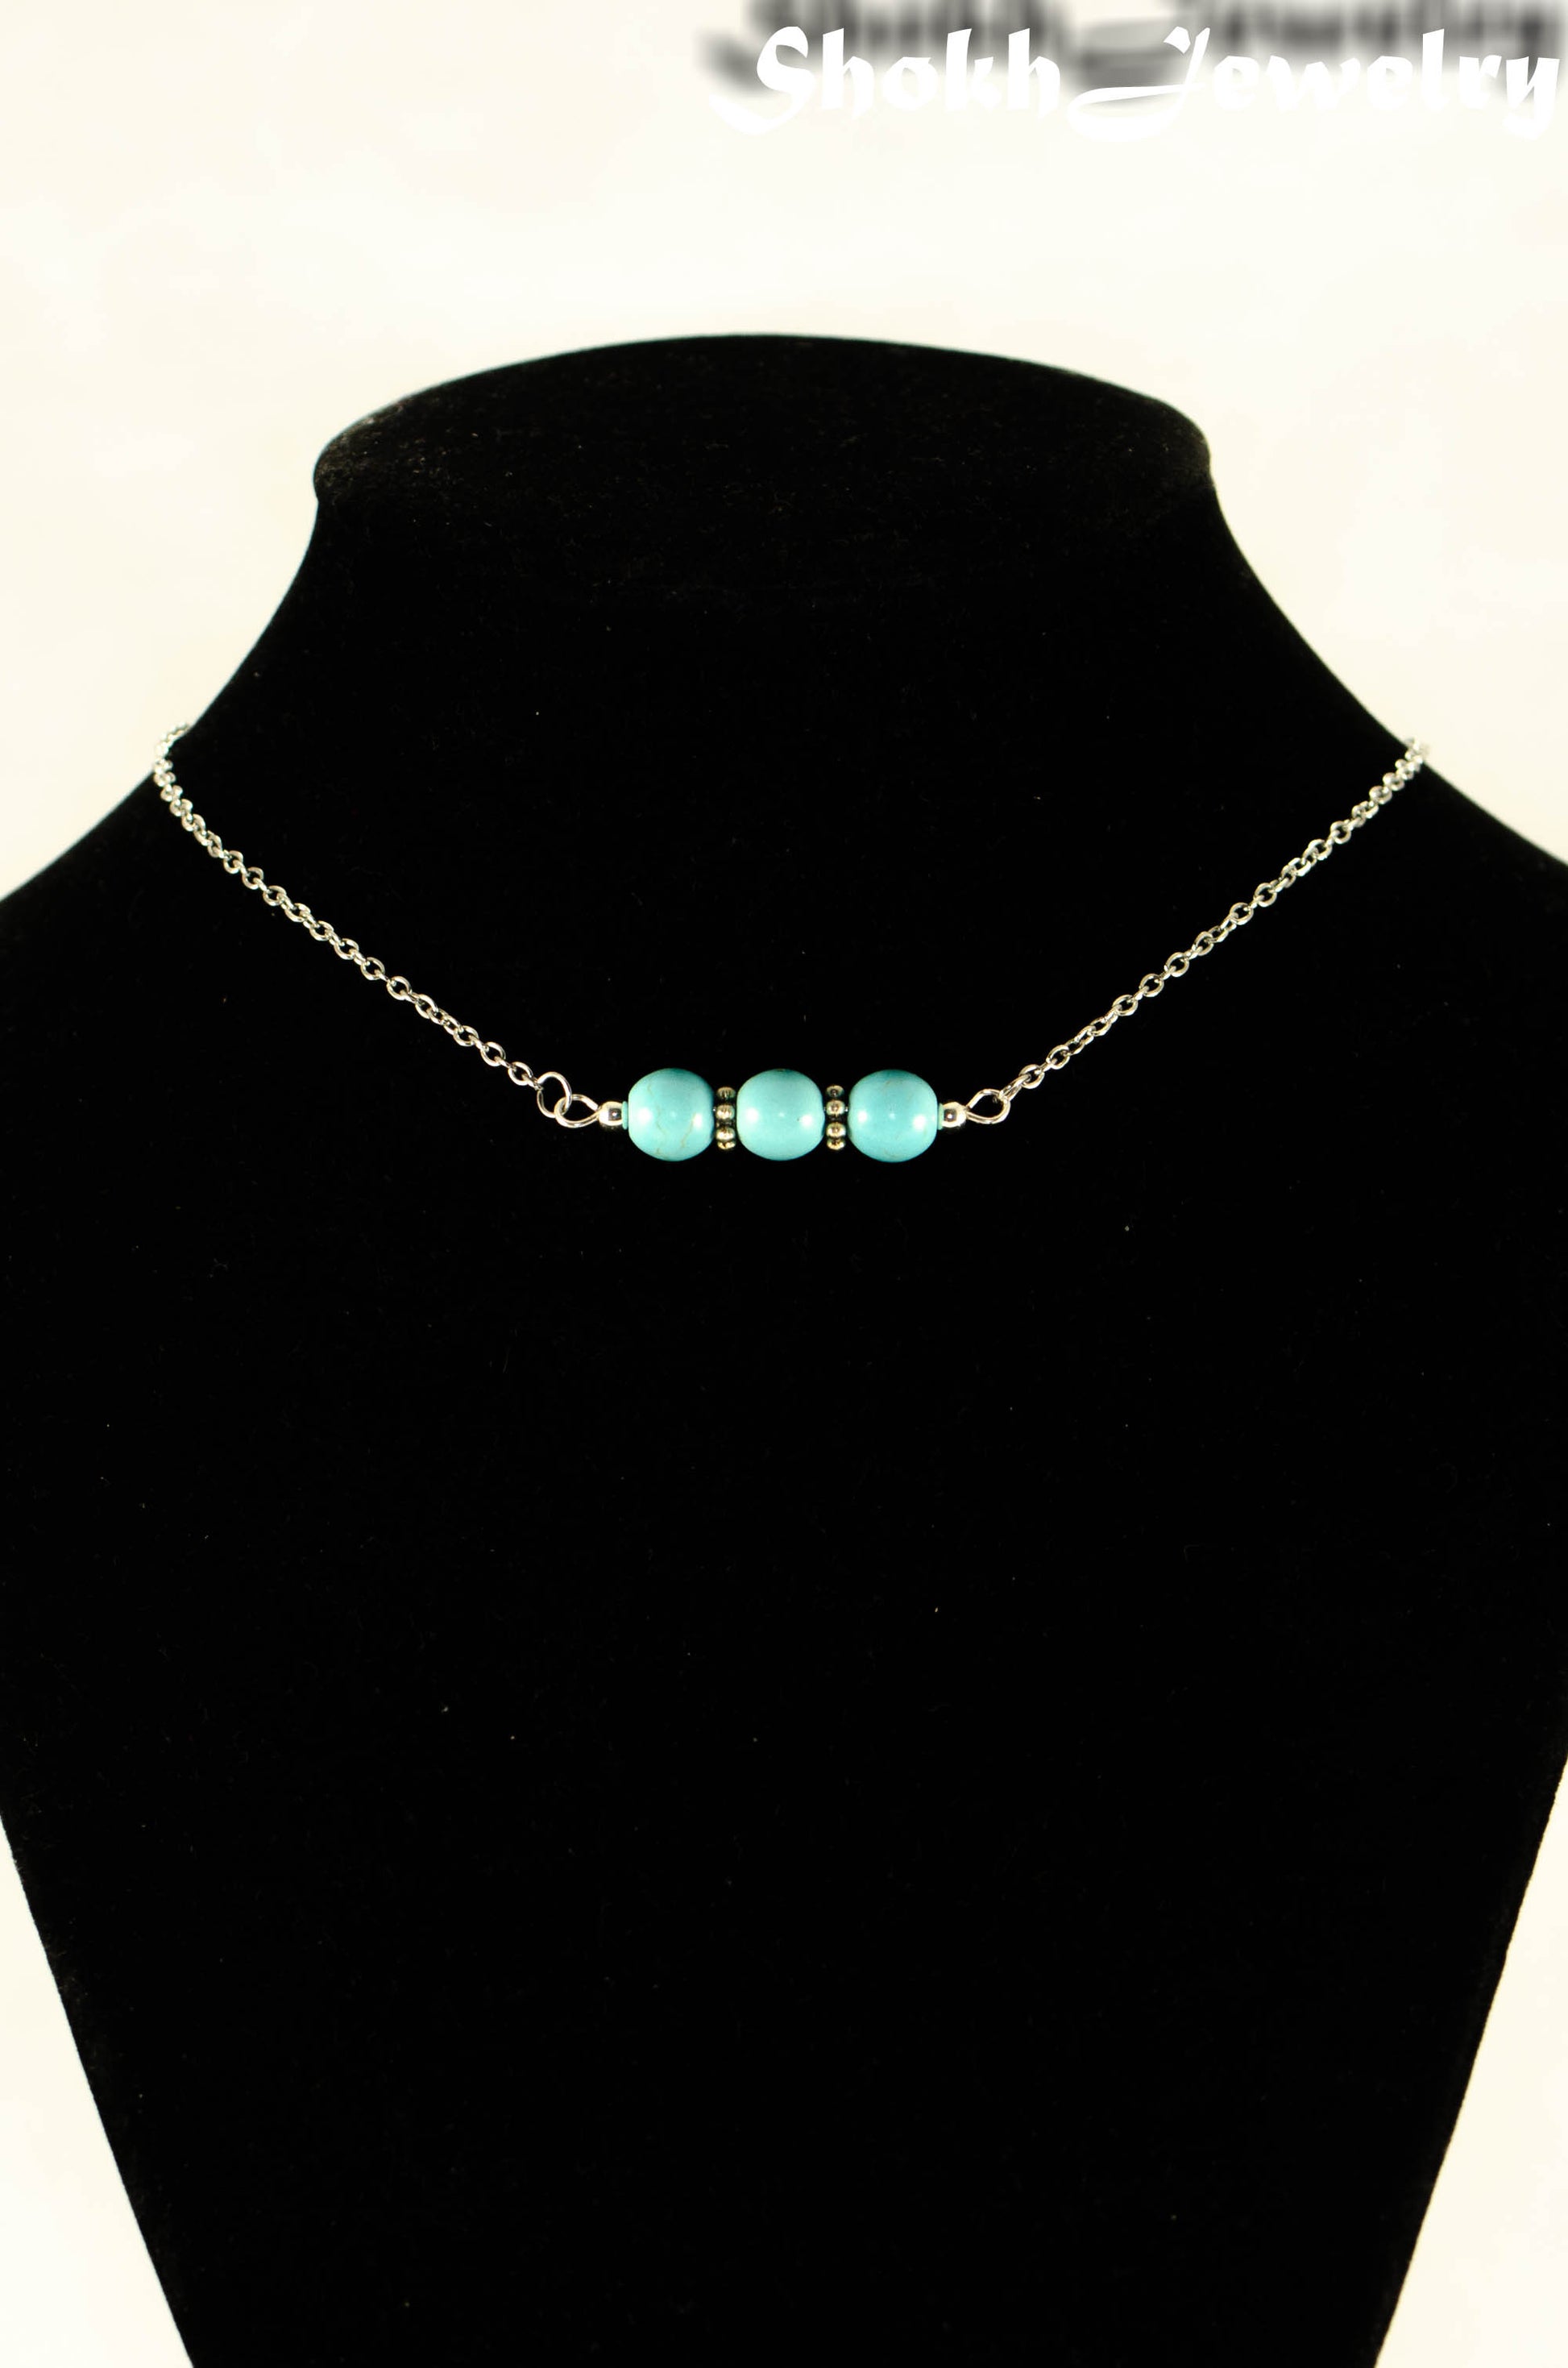 Turquoise Howlite and Dainty Chain Choker Necklace.